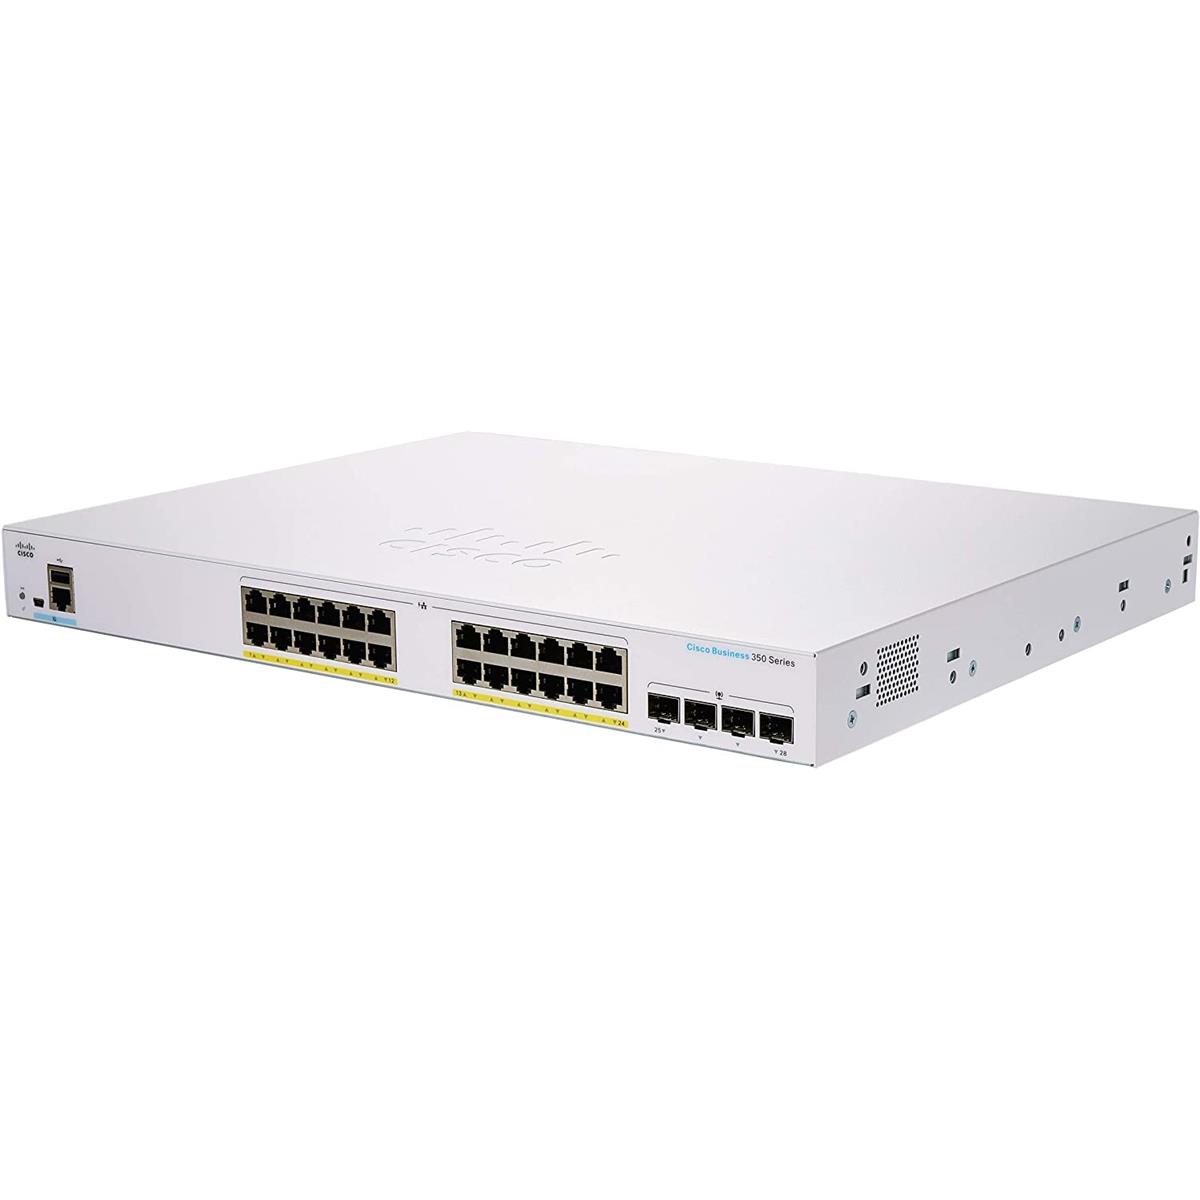 Image of Cisco CBS350-24FP-4G 24-Port Gigabit PoE+ Managed Network Switch with SFP